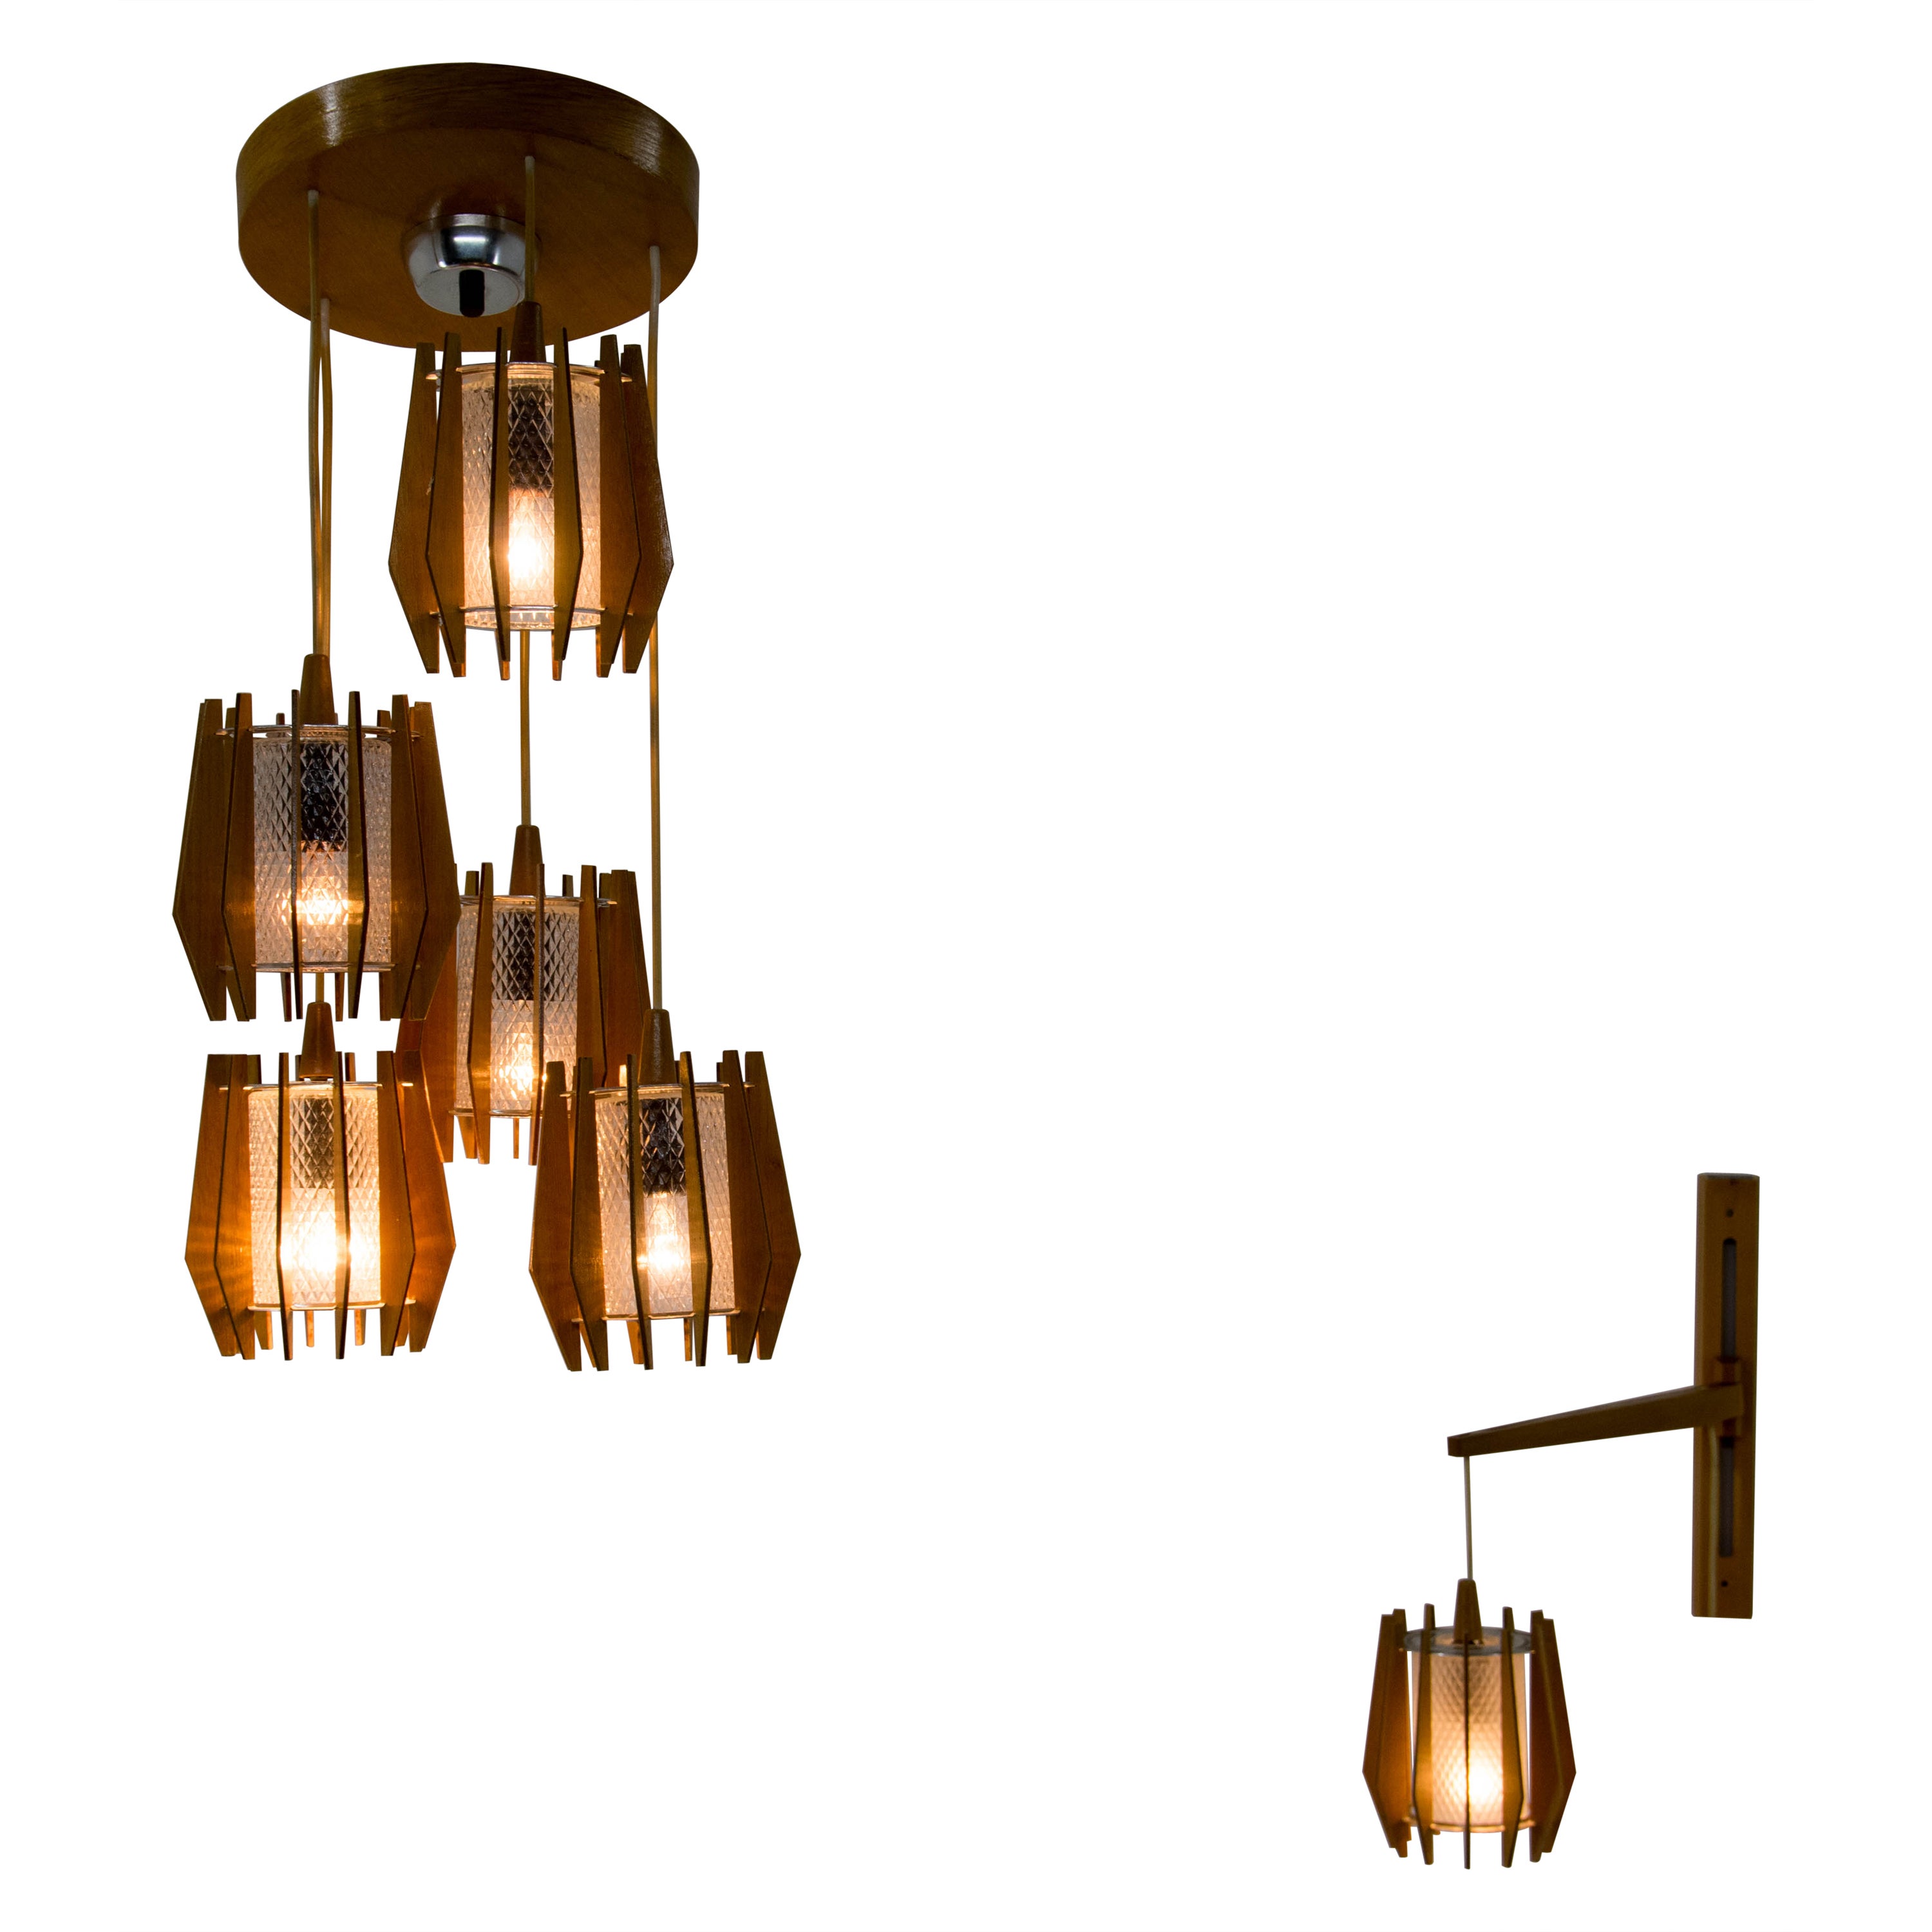 Set of Chandelier and Wall Lamp by Drevo Humpolec, 1970